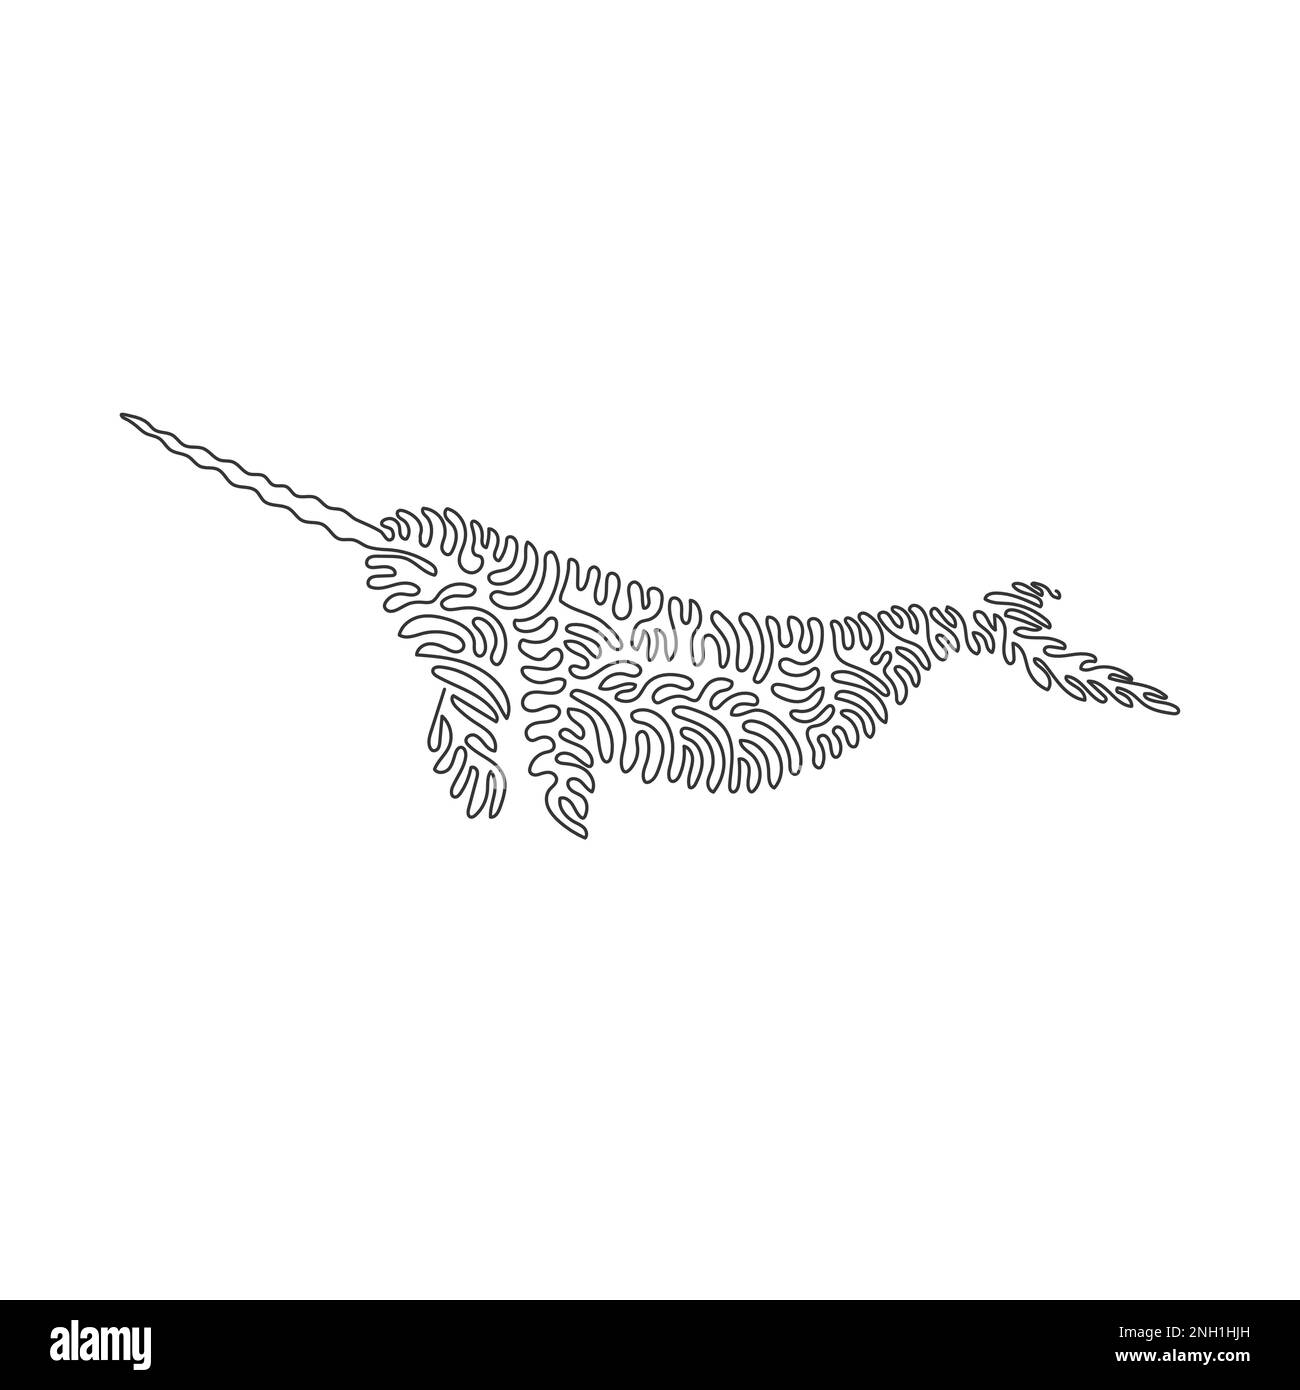 Single one curly line drawing of cute narwhal abstract art. Continuous line drawing design vector illustration of beautiful narwhal with long tusk Stock Vector